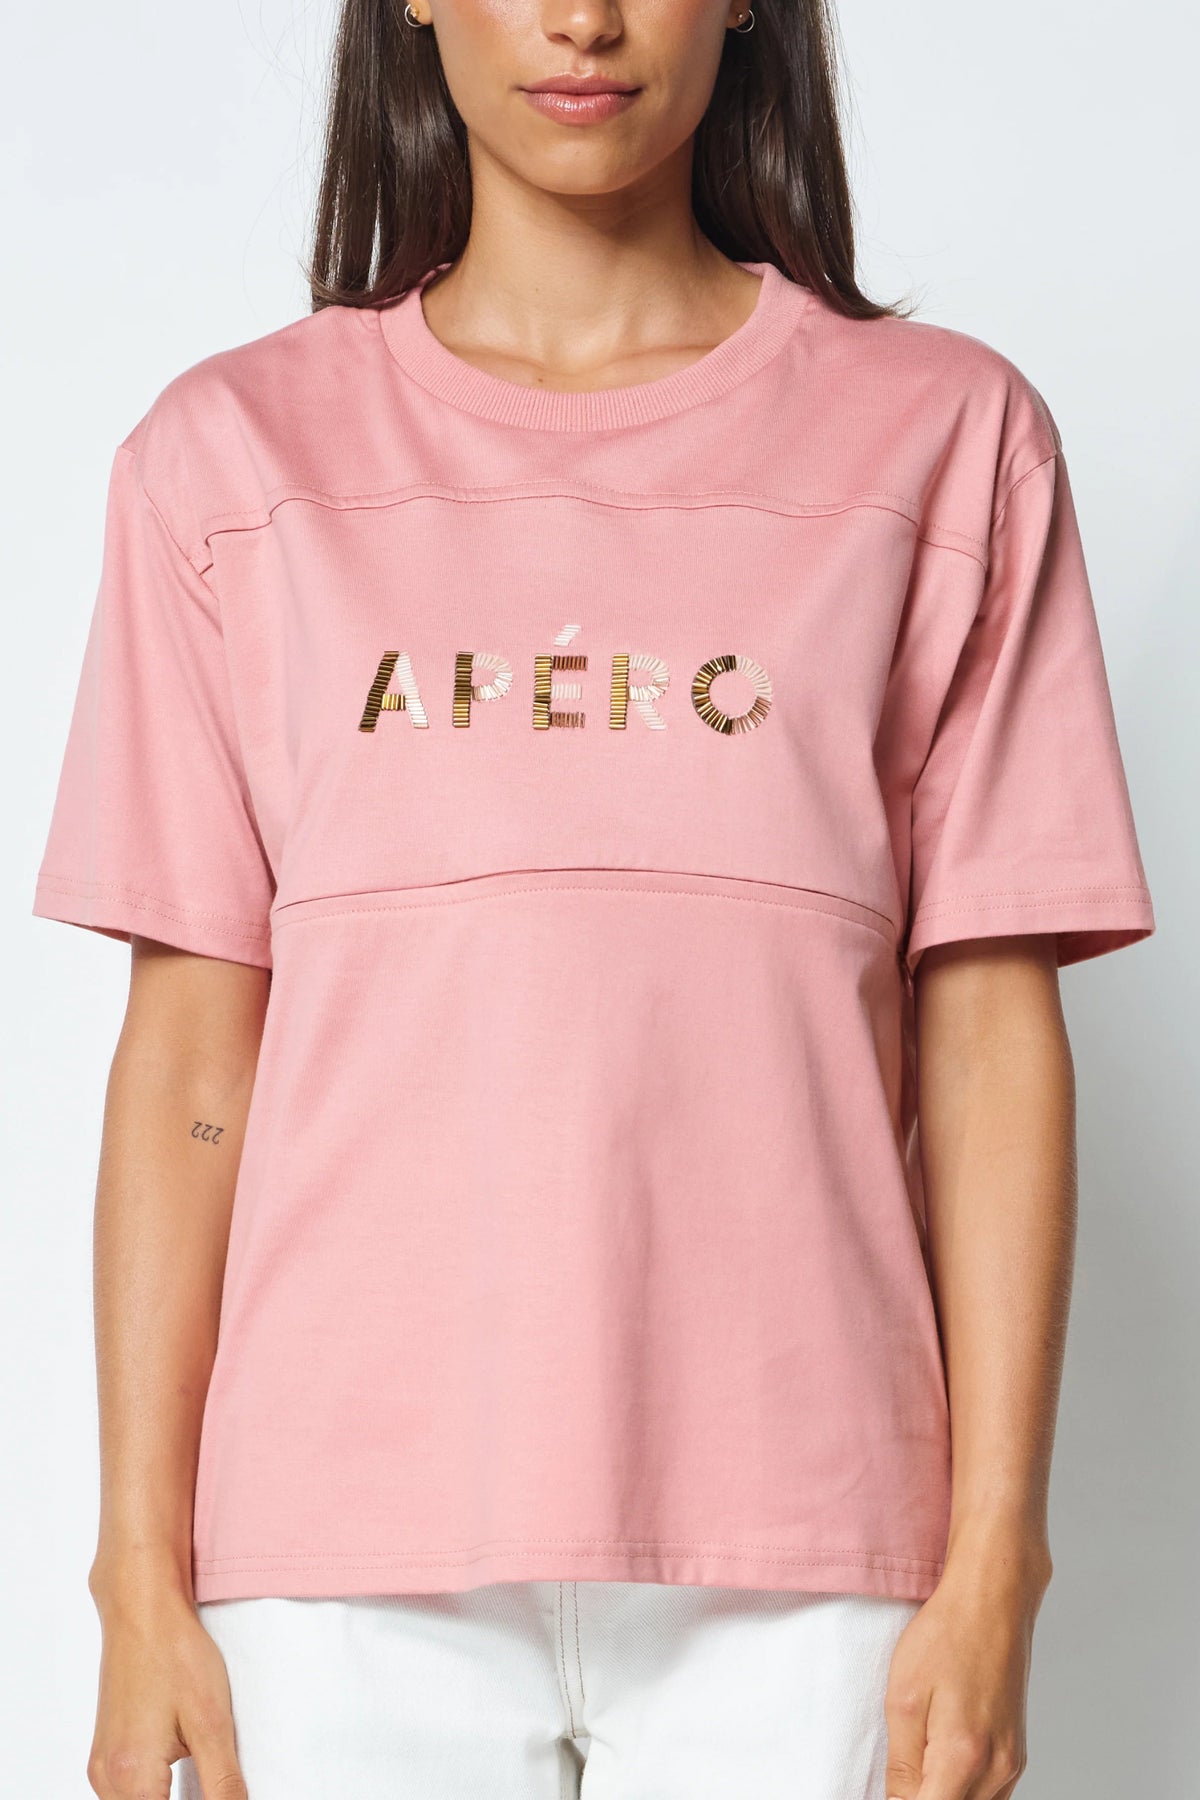 Clair Beaded Panel Tee - Dusty Rose - Sare StoreApero LabelTshirt